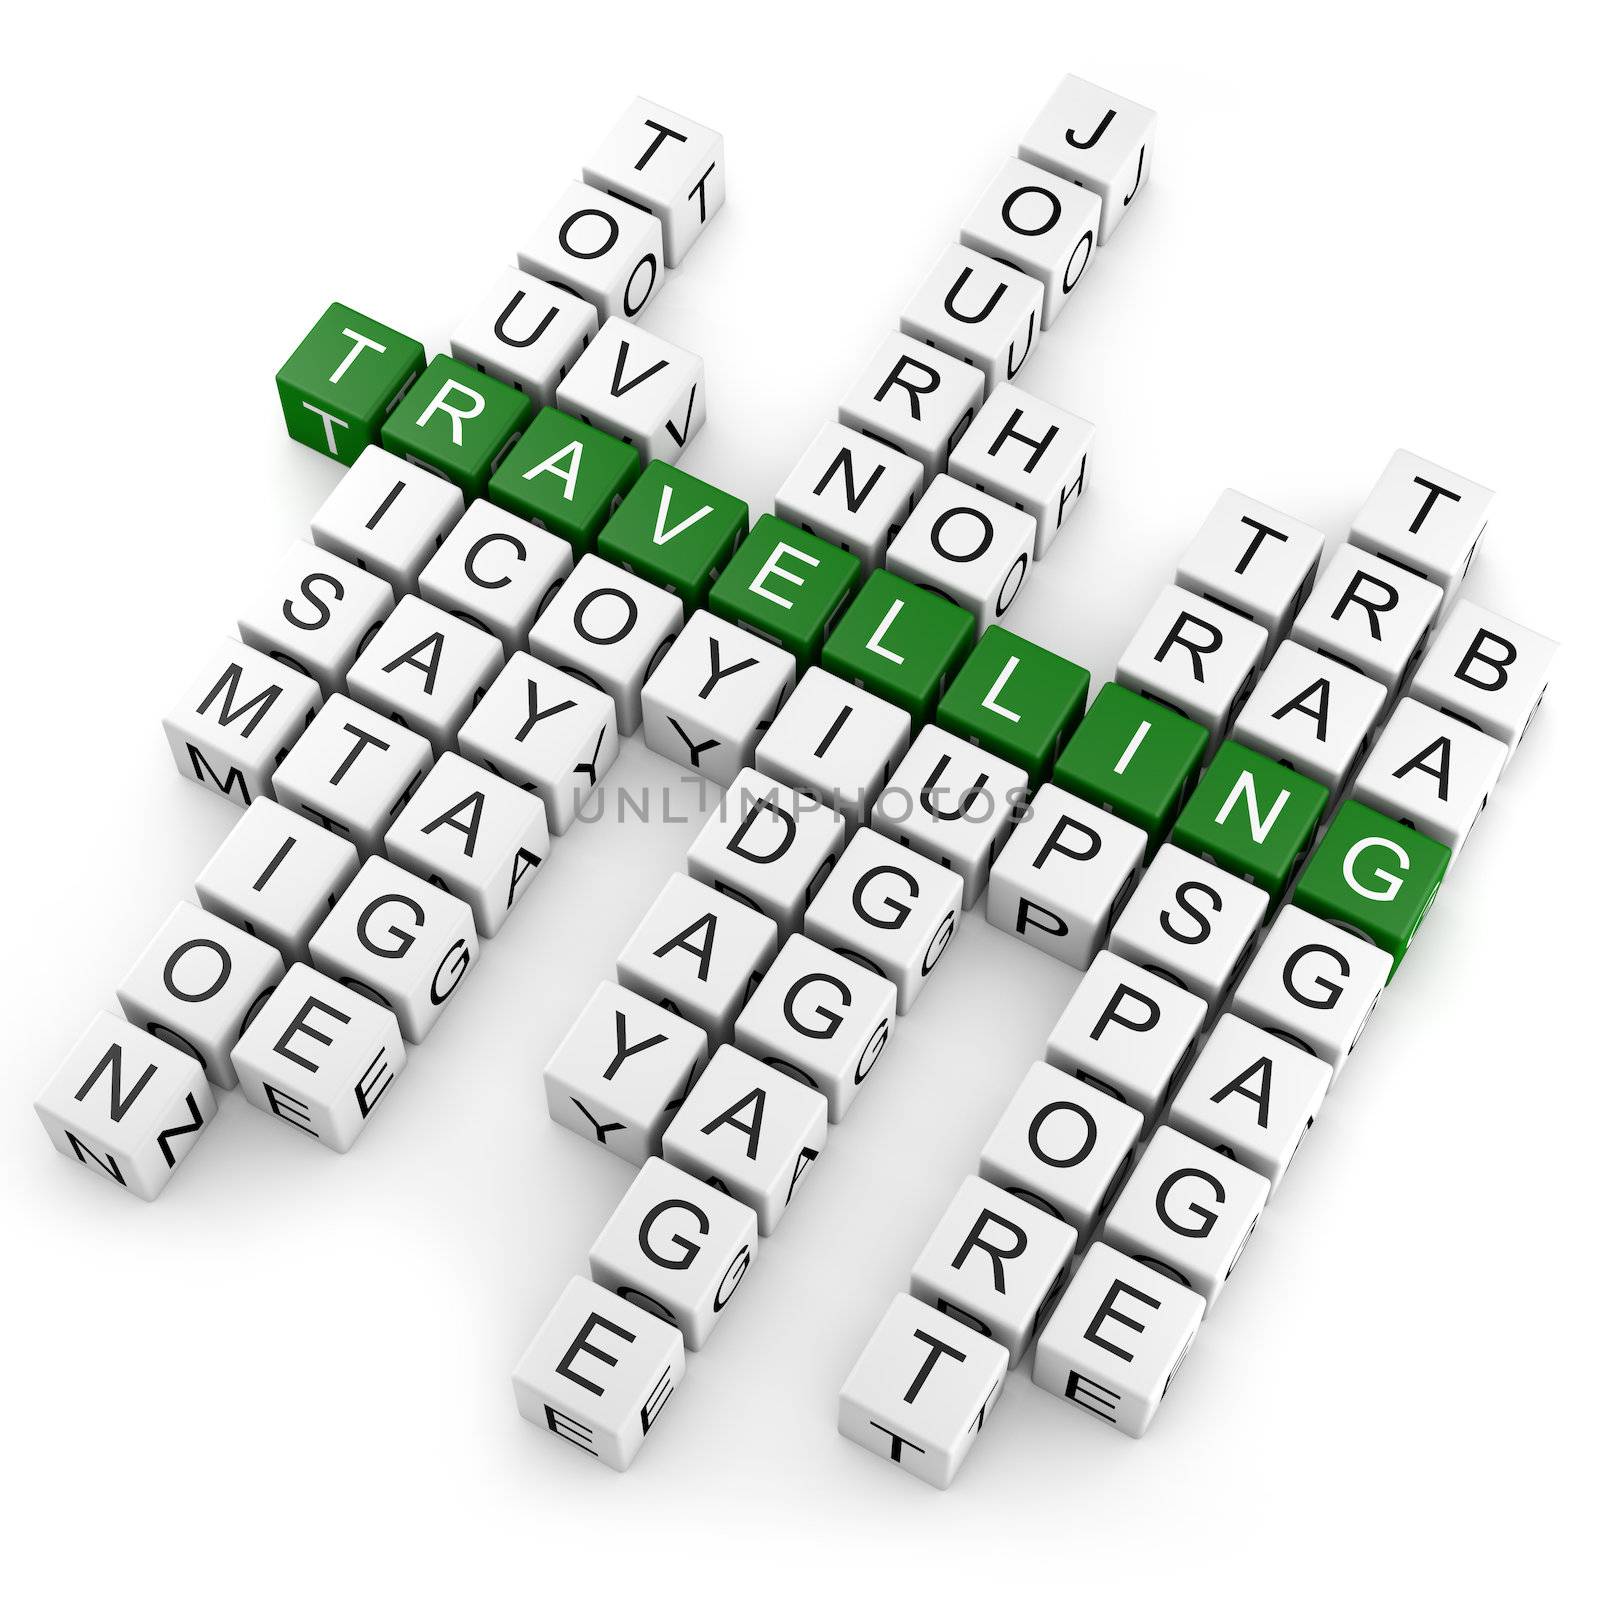 Crosswords with several travelling related words